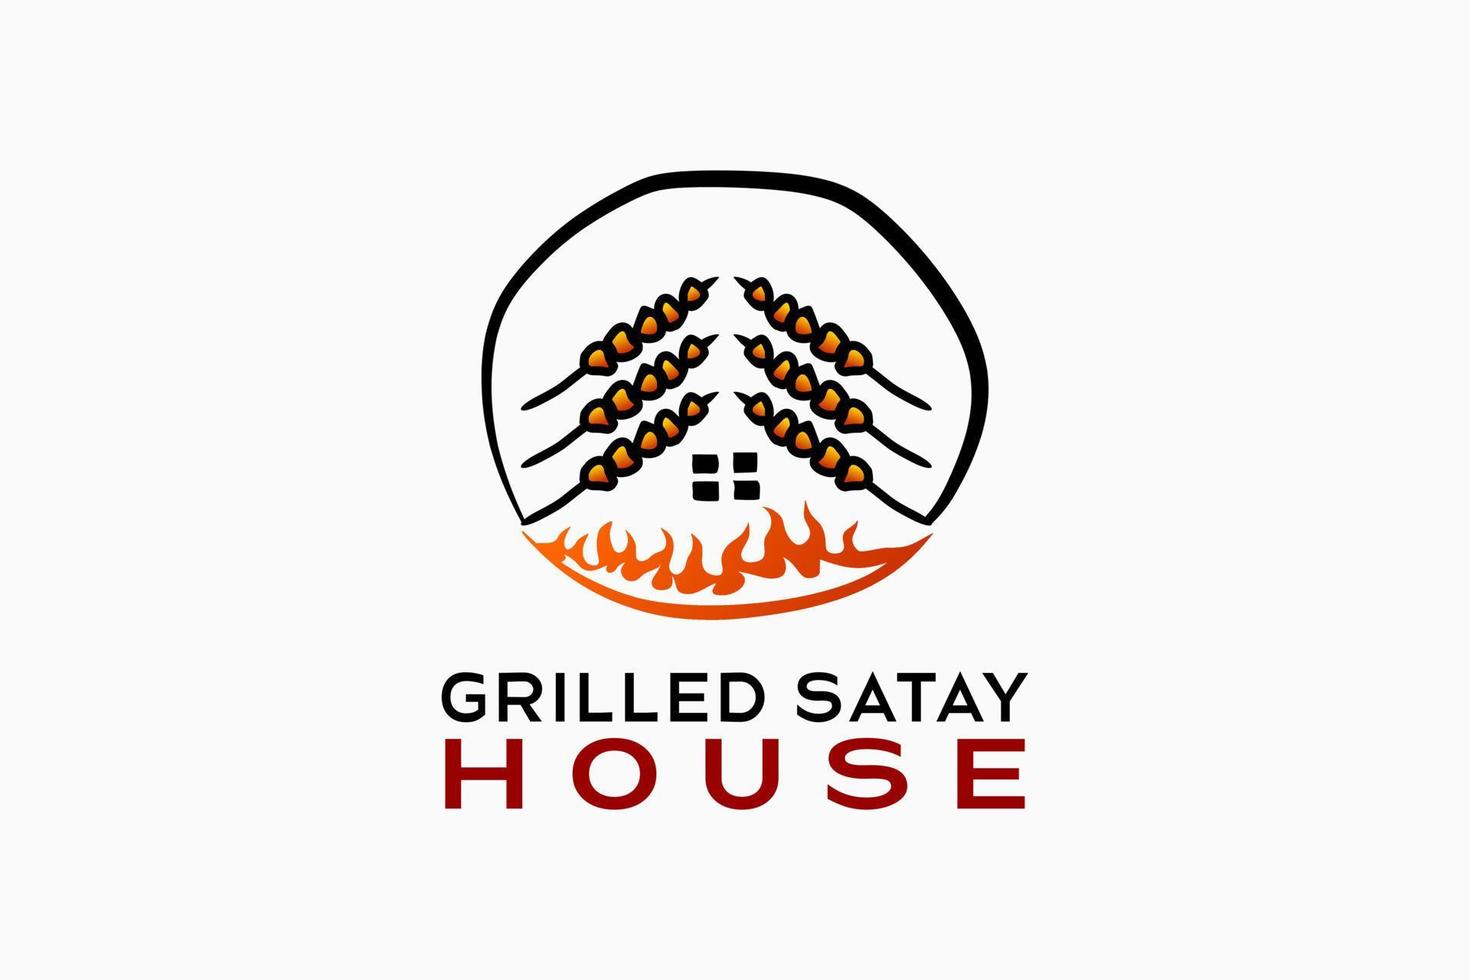 Grilled sate house logo design with a creative hand-drawn concept. The satay icon combines with the fire icon in the shape of a house in a circle. Logo illustration for grilled meat restaurant vector